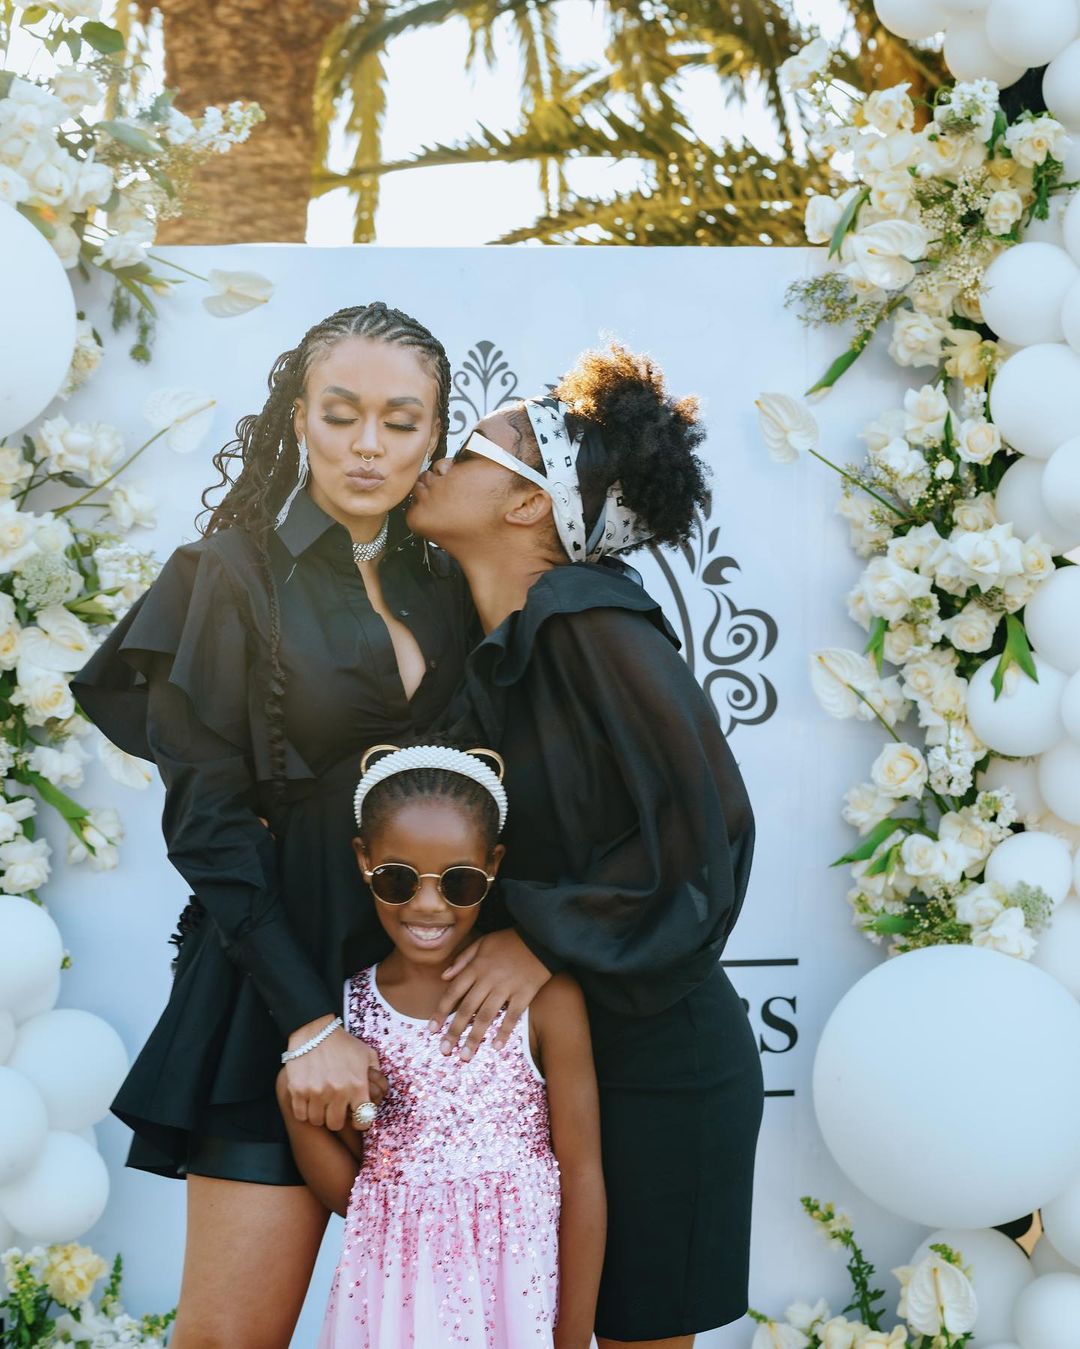 Pearl Thusi’s kid Okuhle leaves SA in stitches with cute grocery list